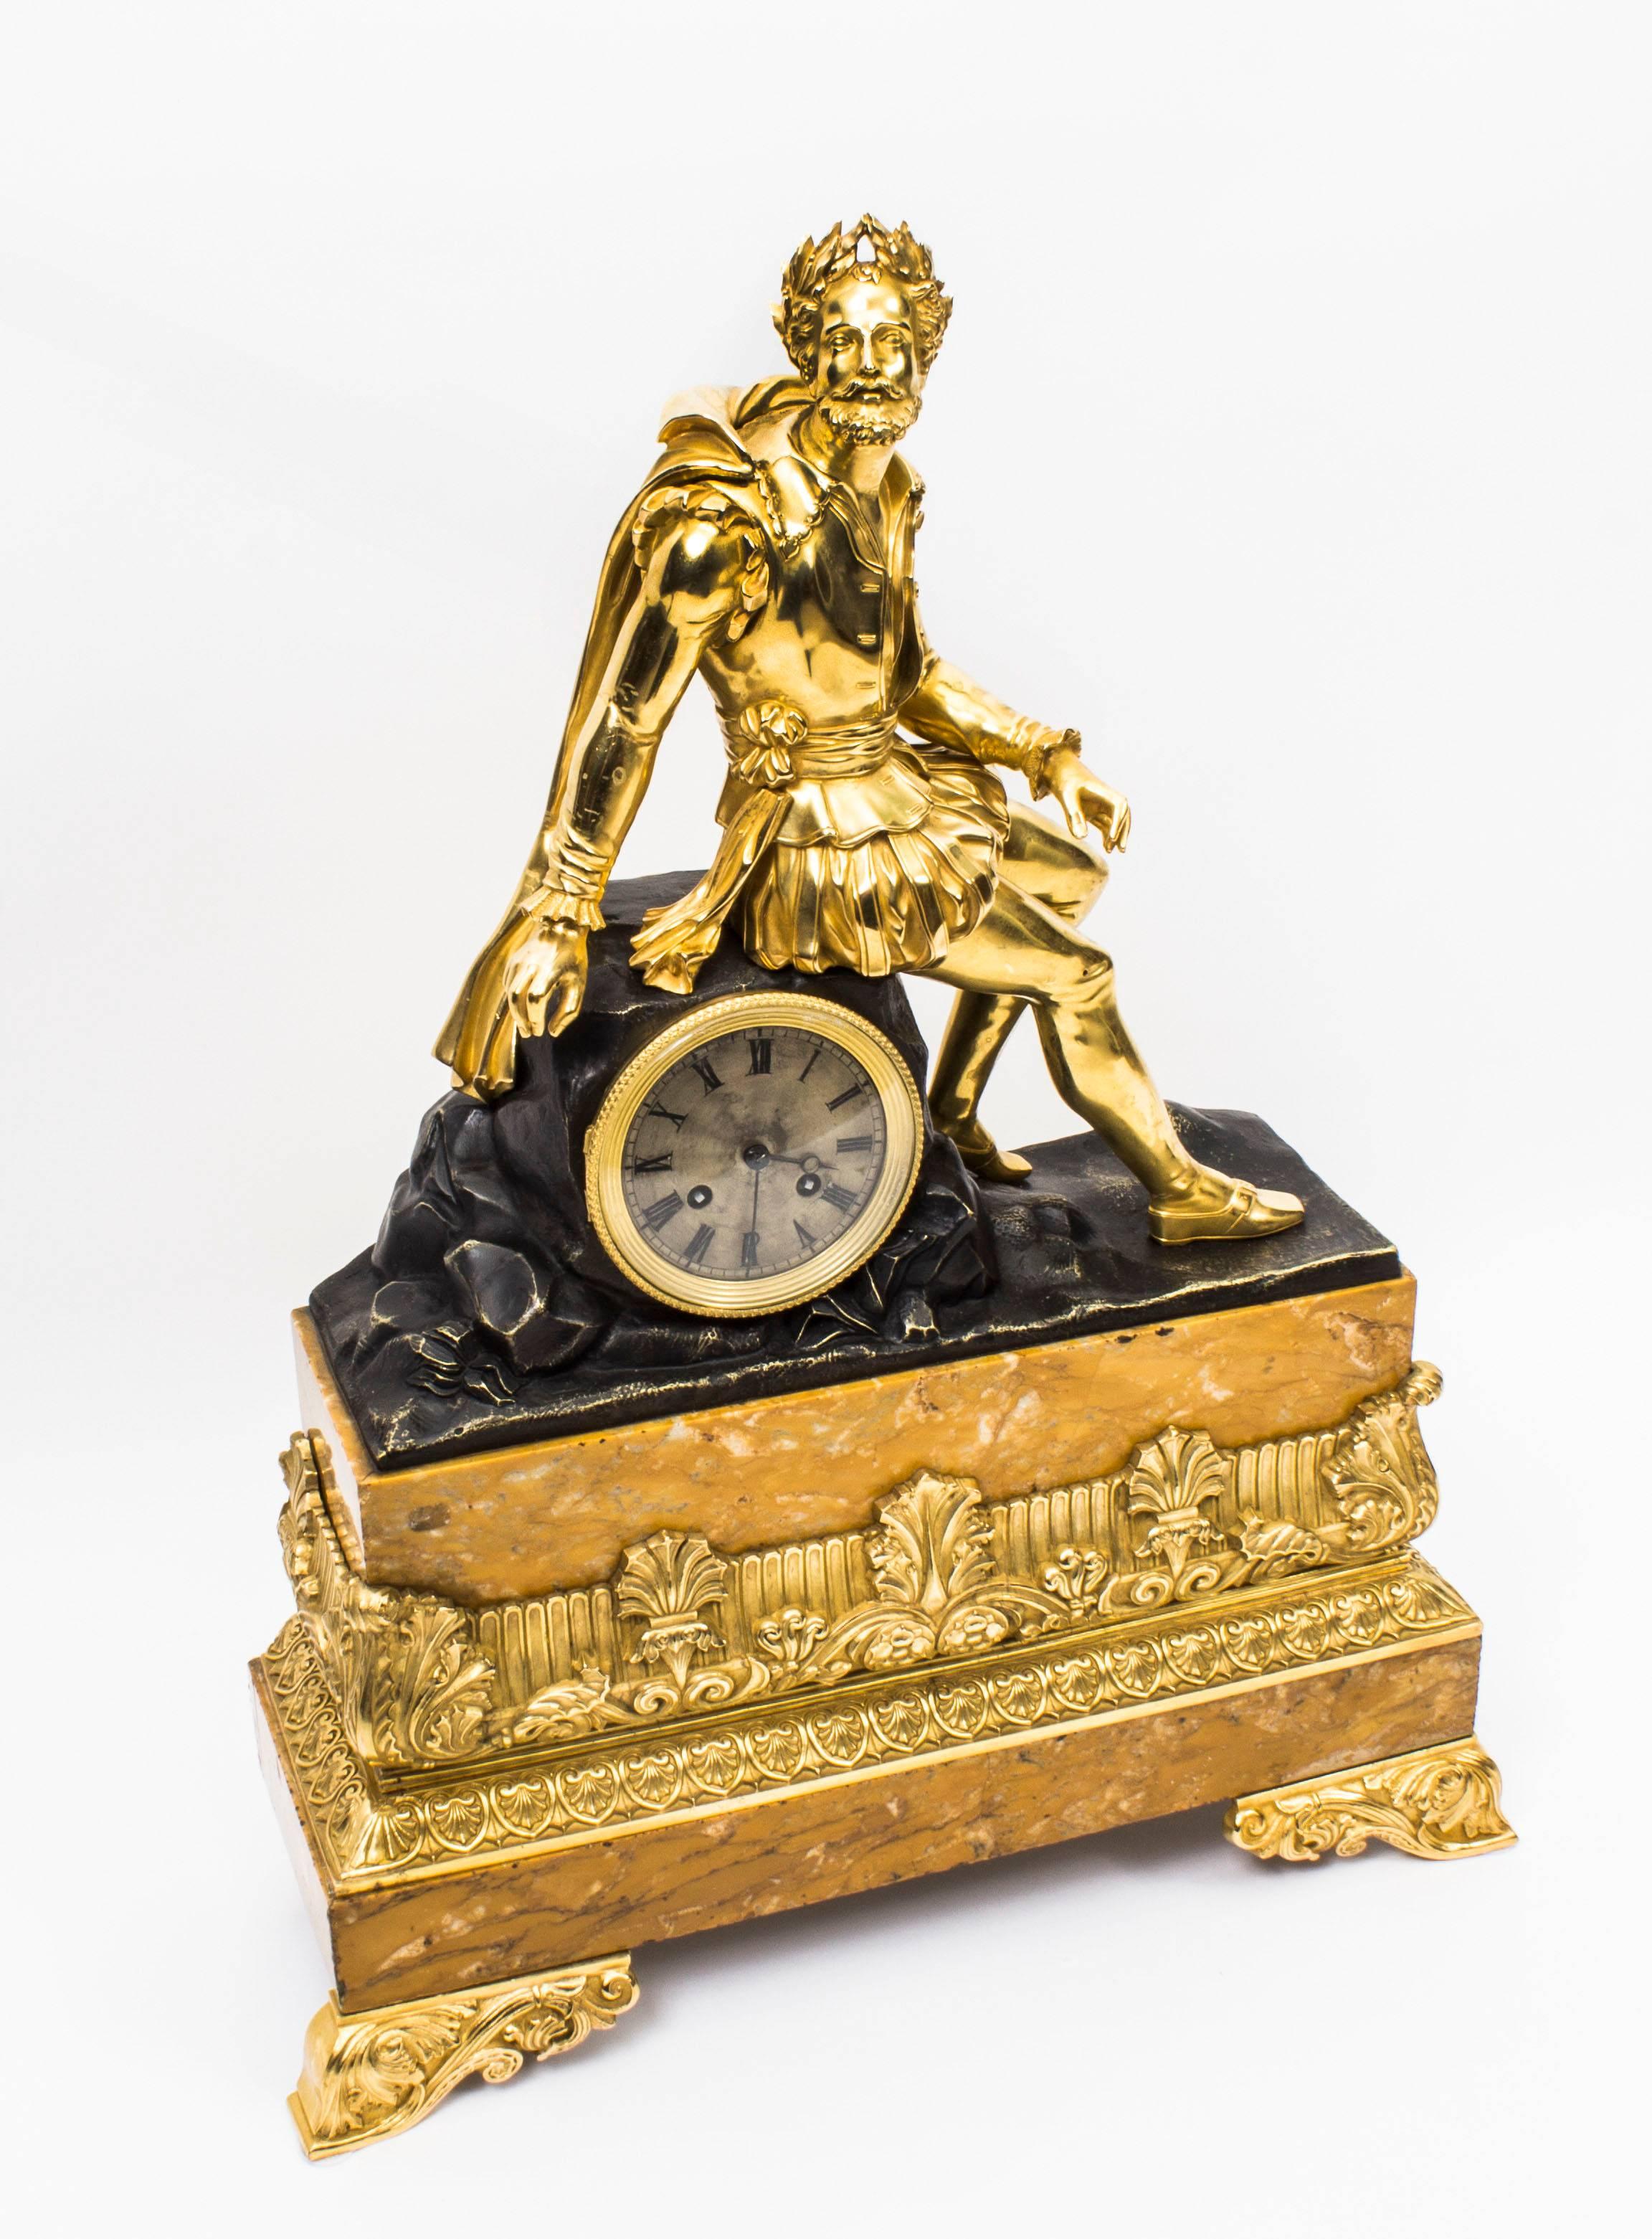 This is a fabulous ormolu, bronze and Siena marble mantel clock circa 1850 in date.

This beautiful clock features an ormolu figure dressed in a Renaissance costume wearing a laurel wreath, casually sitting on a bronze rock with an inset Roman